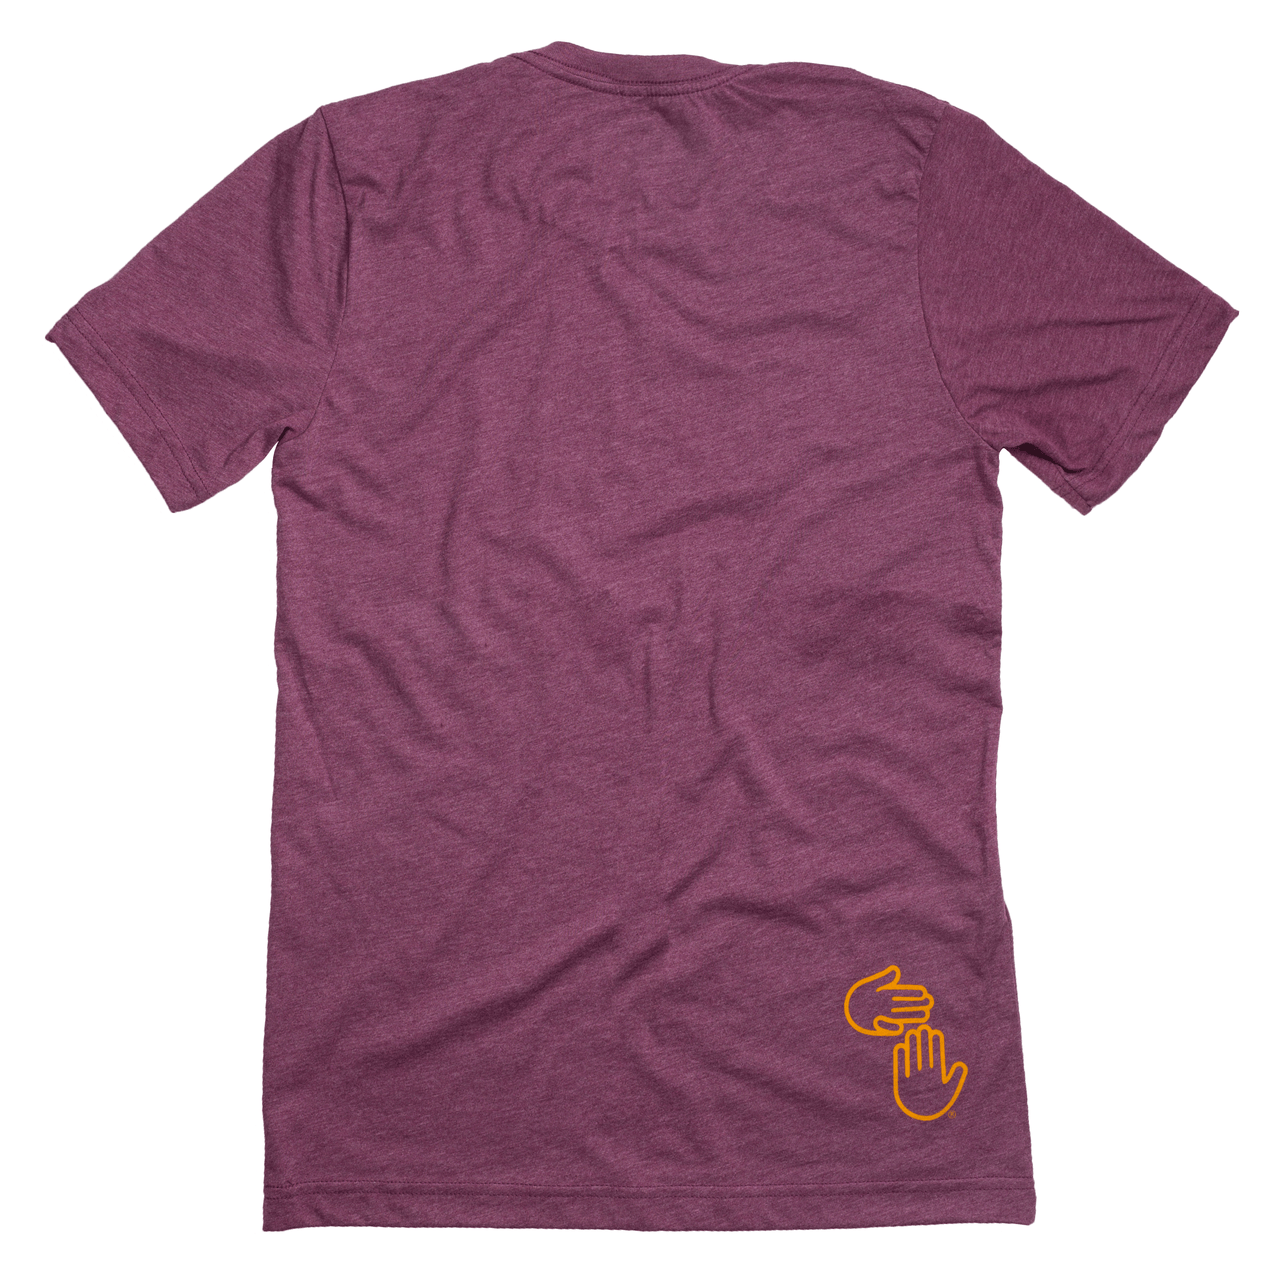 Michigan Hands Tee (Maroon and Gold)